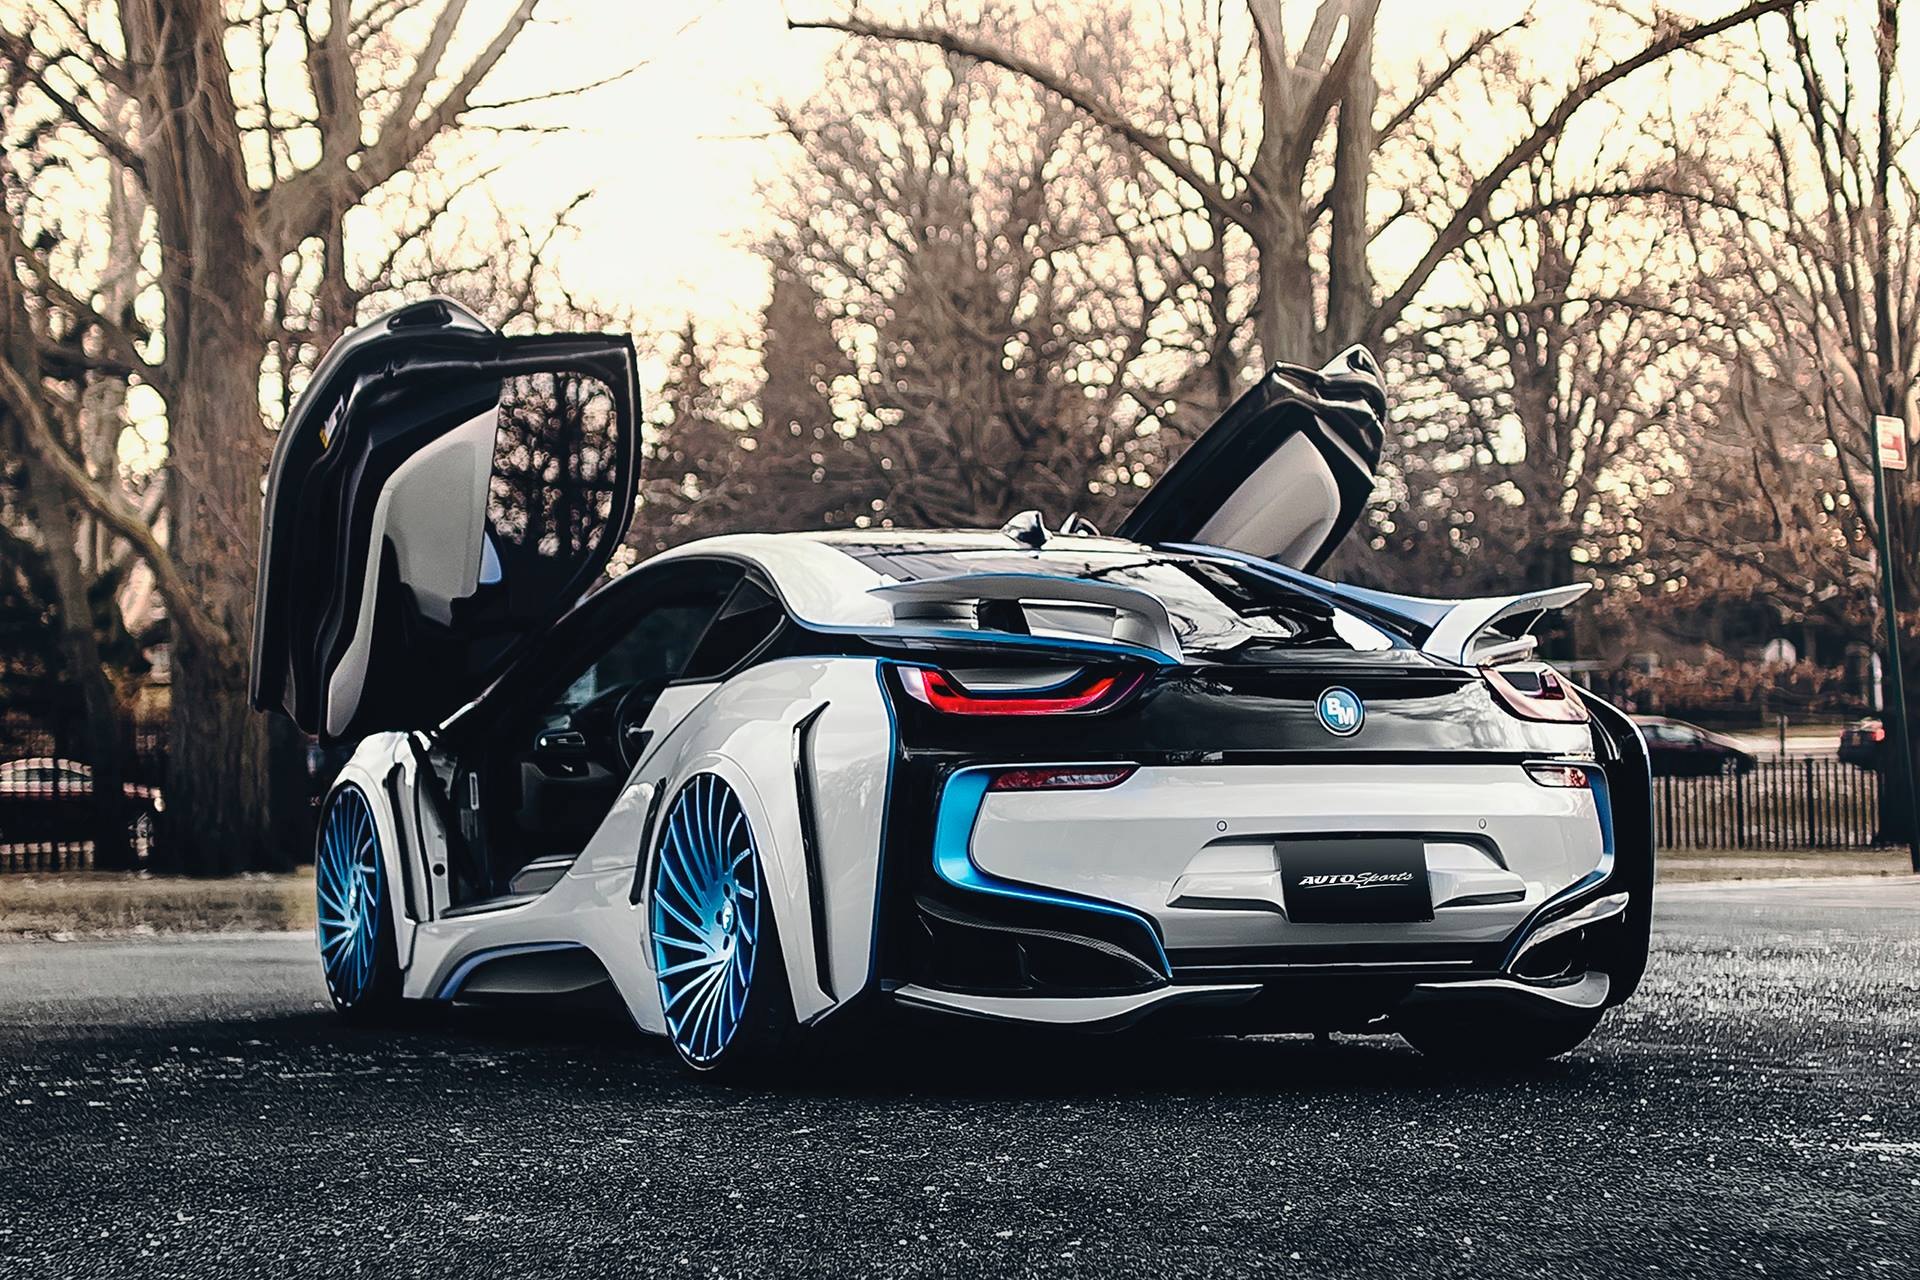 Aftermarket Rear Diffuser on White BMW i8 - Photo by Forgiato